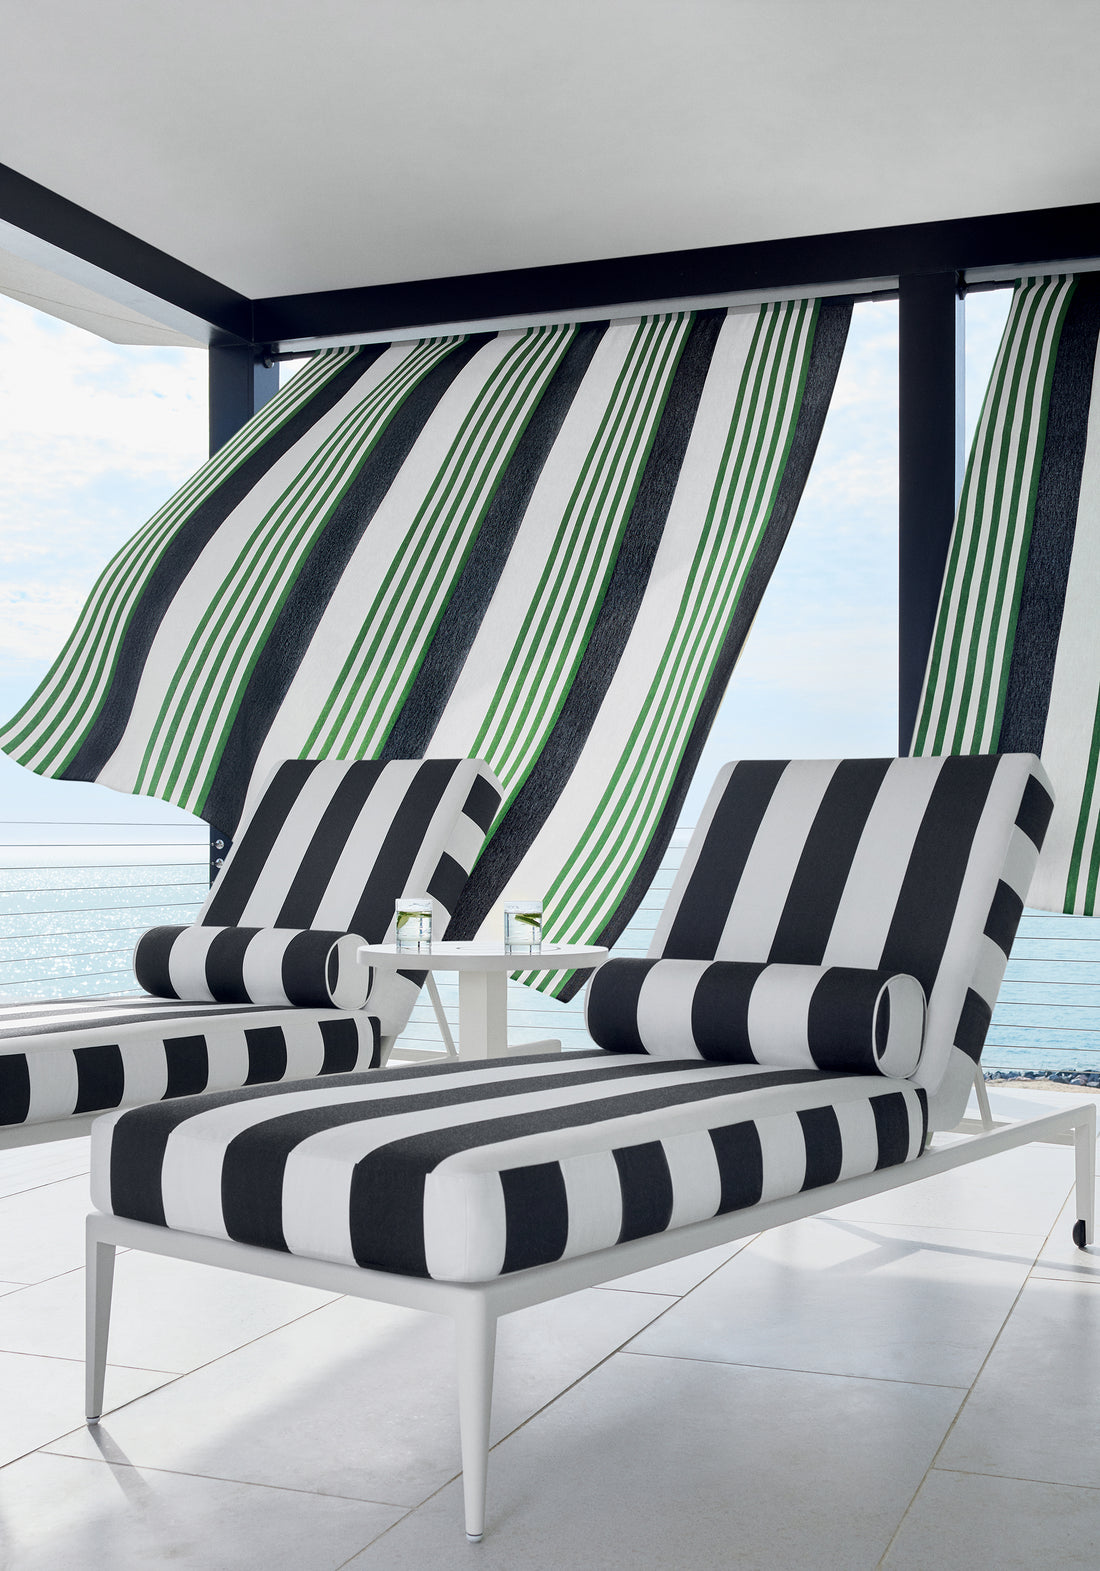 Outdoor chaise lounge chairs upholstered in Cabana Stripe fabric in onyx color - pattern number W81638 - by Thibaut fabrics